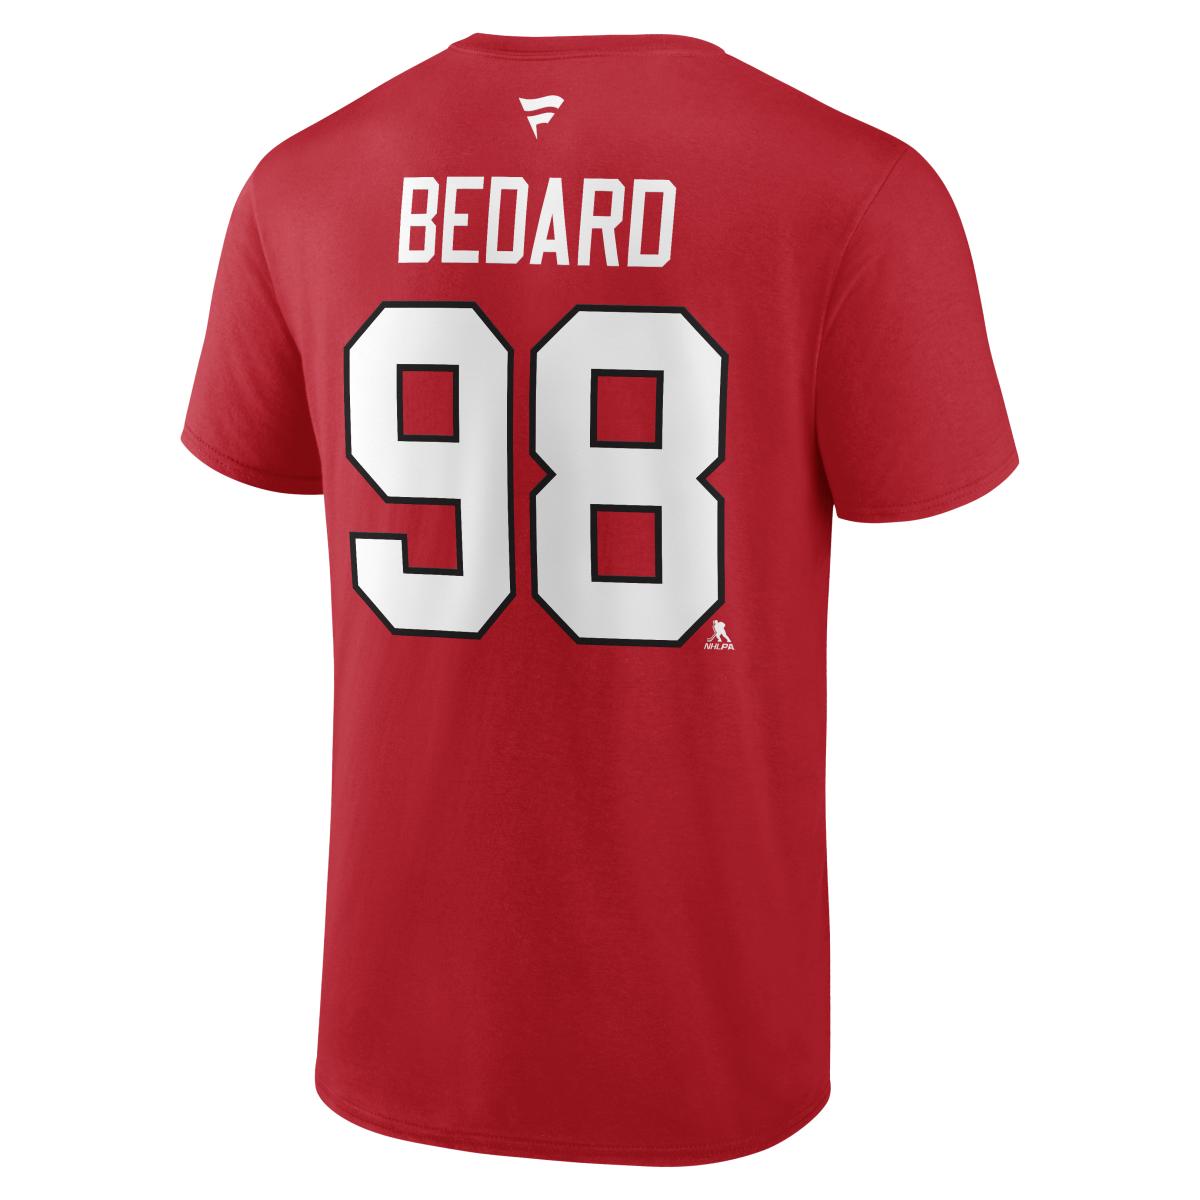 Connor Bedard jerseys are available on NHL website